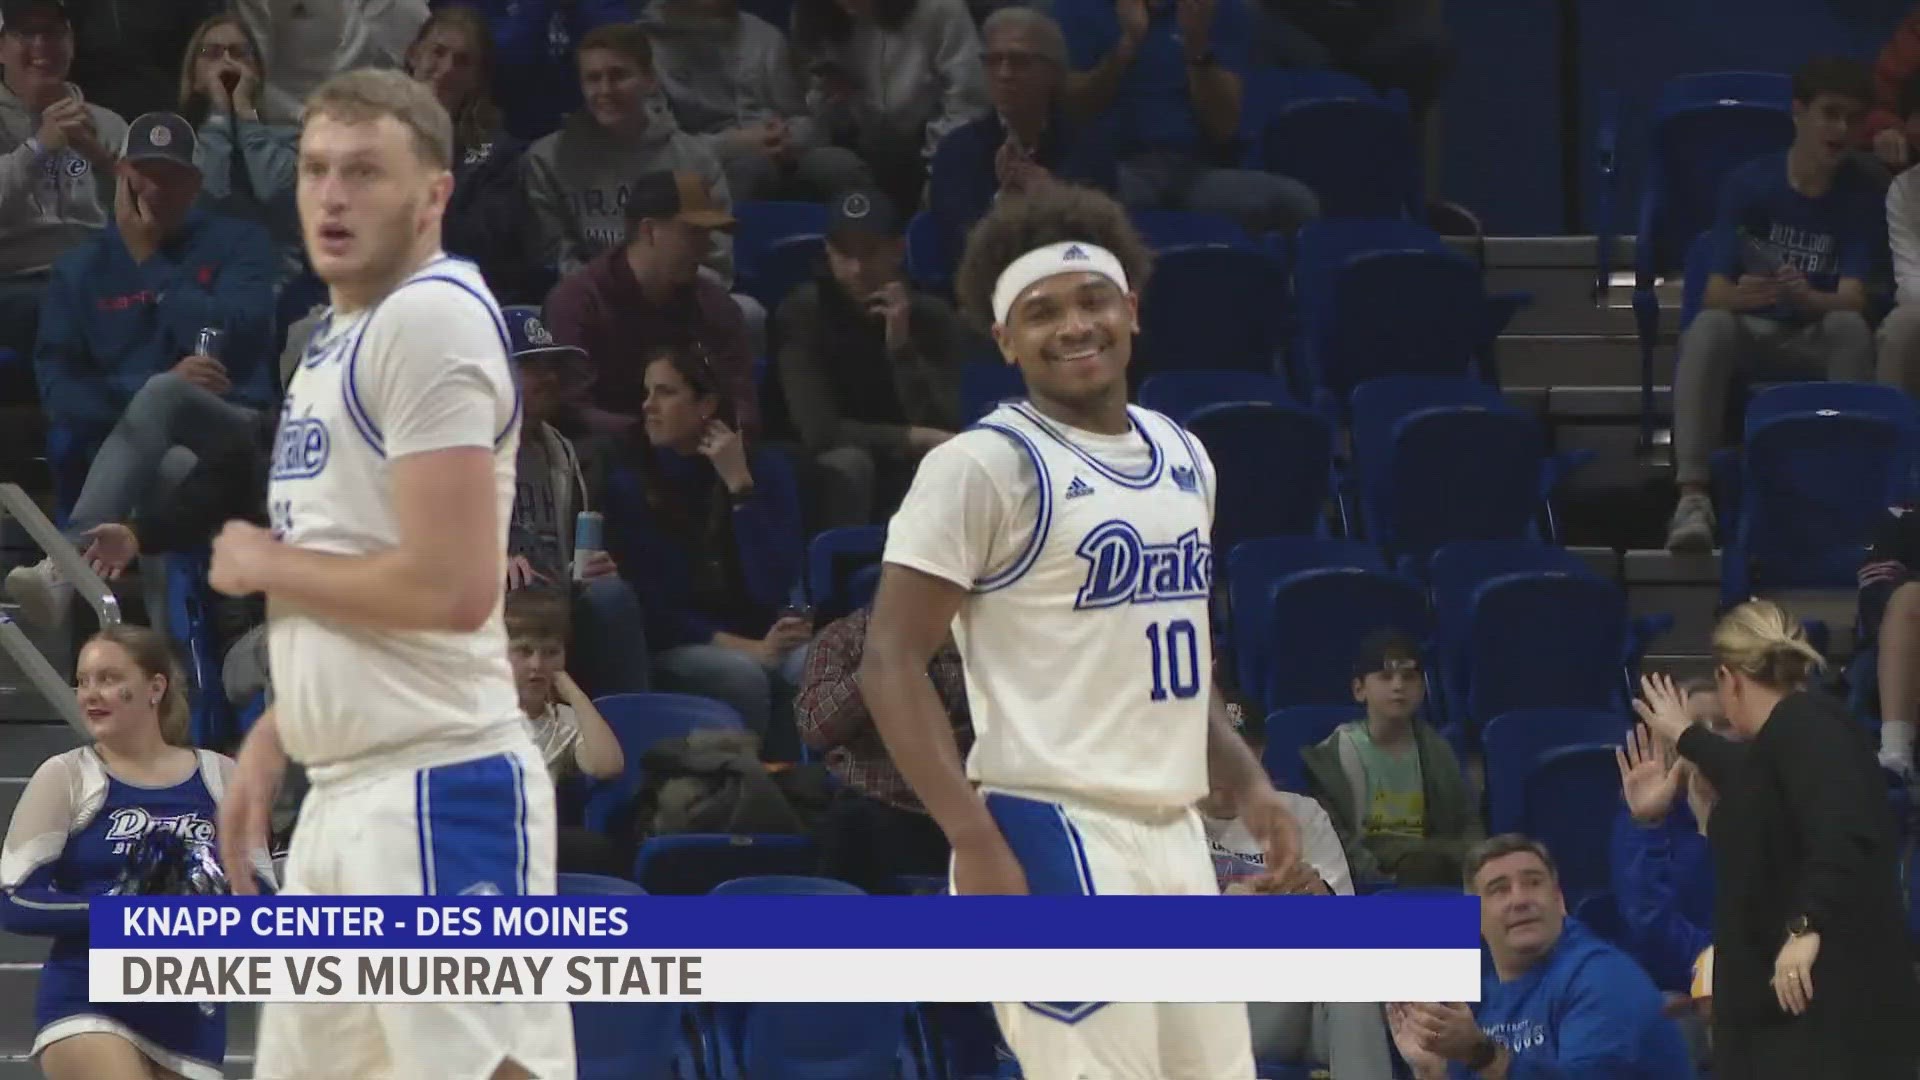 Kevin Overton had 23 points in the Bulldogs' 95-72 victory over Murray State on Sunday.